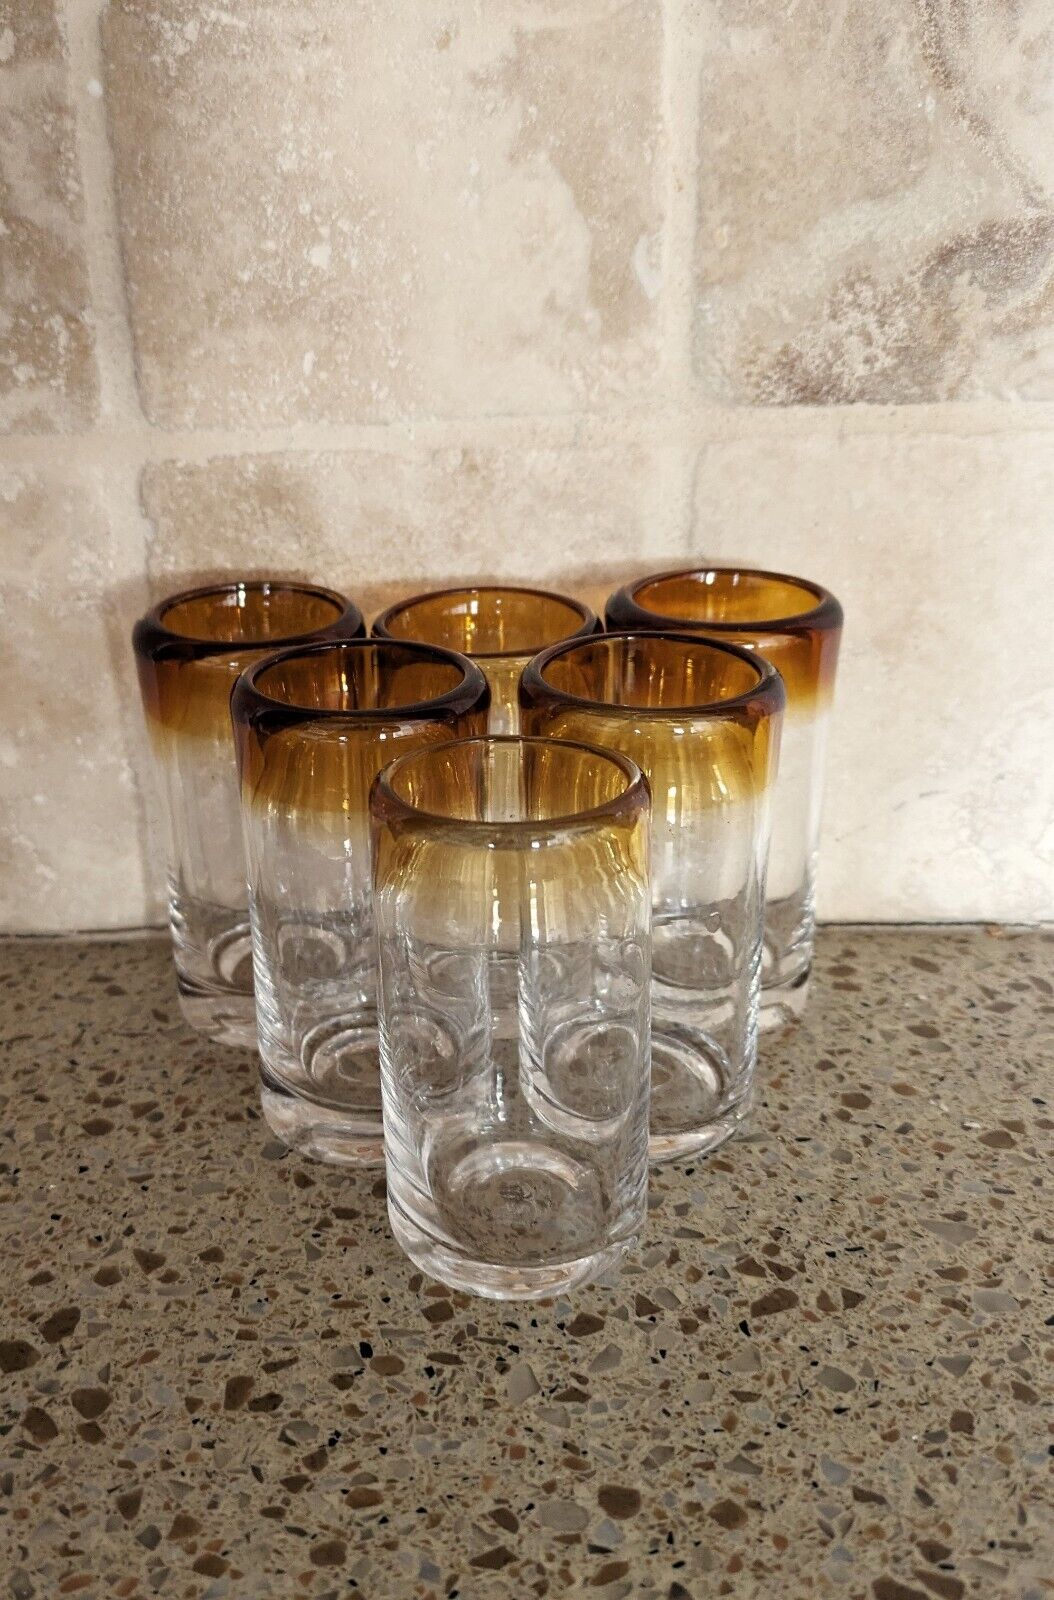 Six Handblown Mexican Shot Glasses with Amber Rims